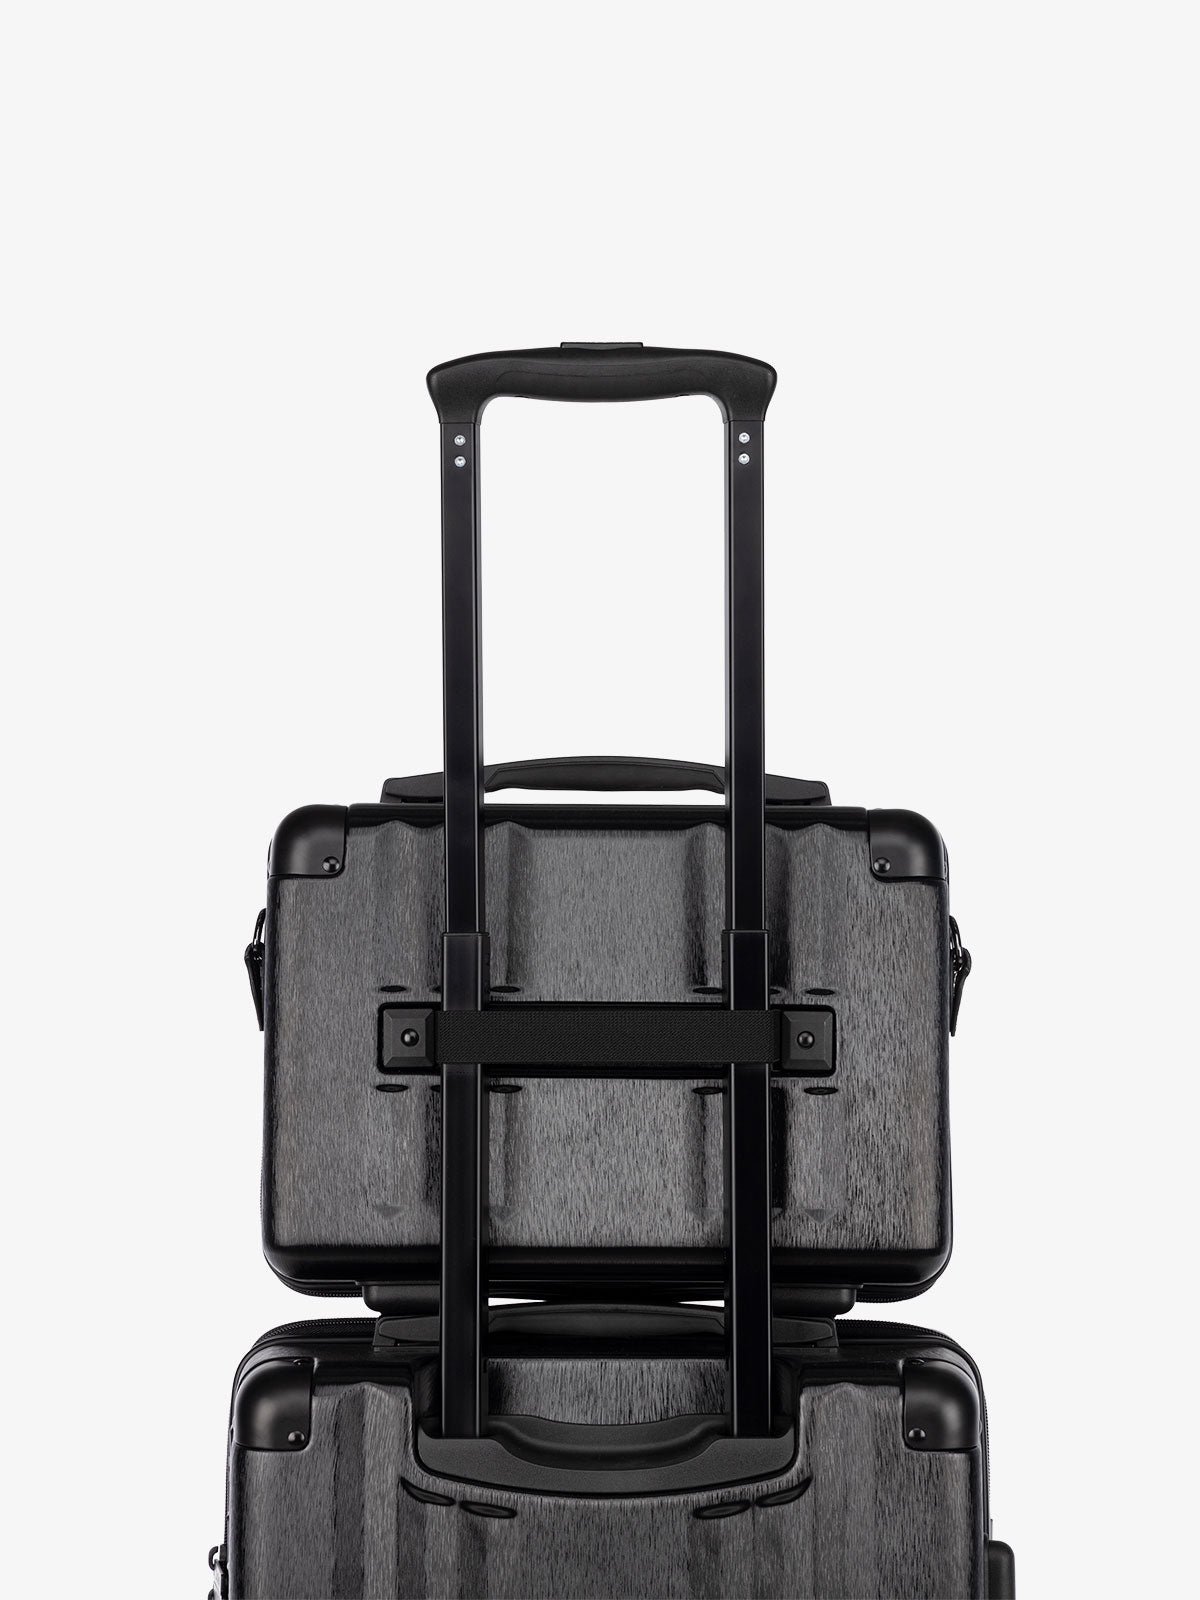 CALPAK Ambeur black travel vanity case with rolling carry on suitcase